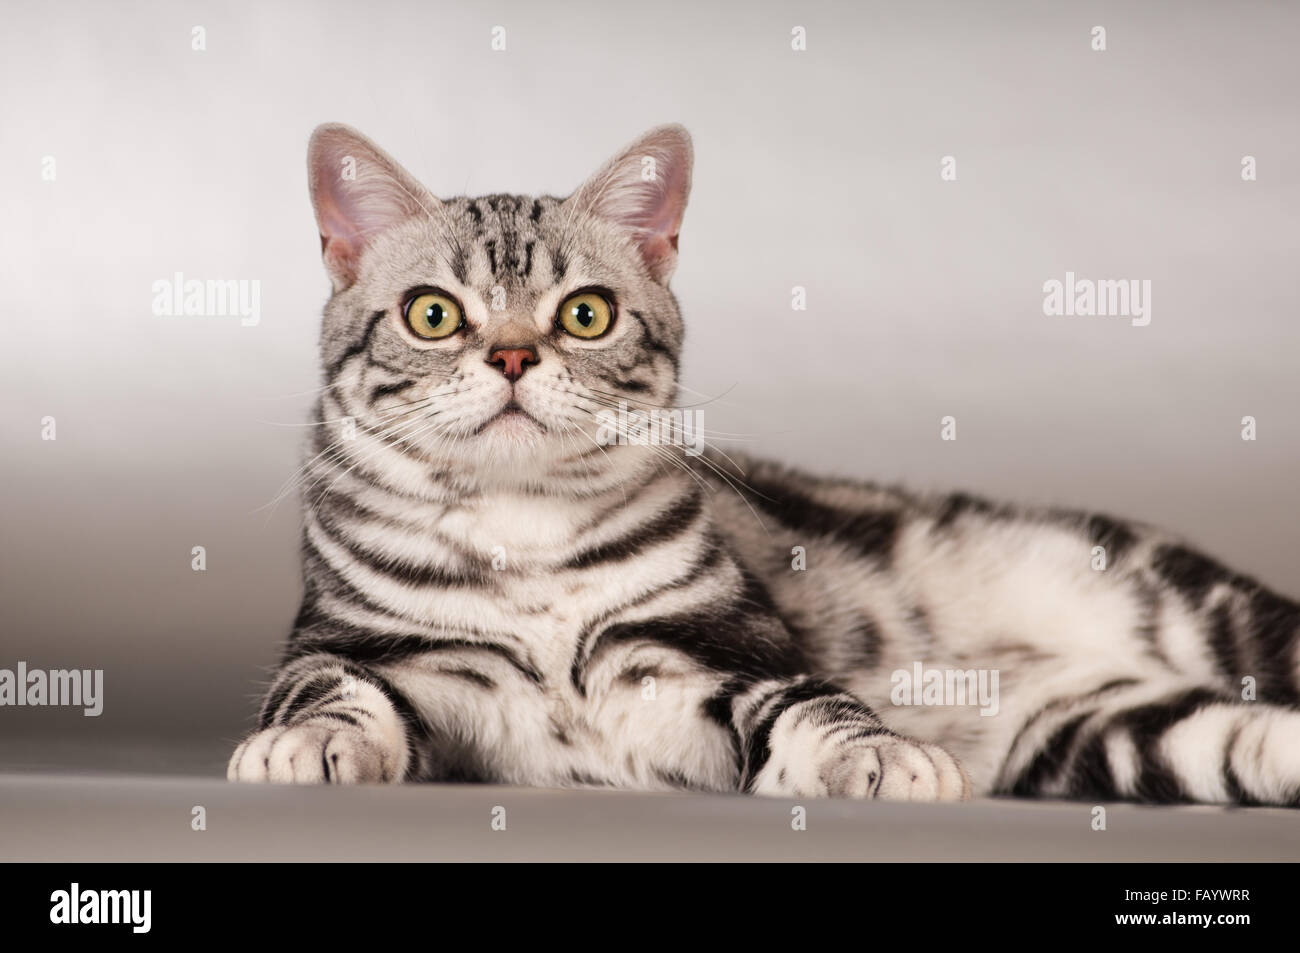 Purebred american shorthaired cat portrait Stock Photo